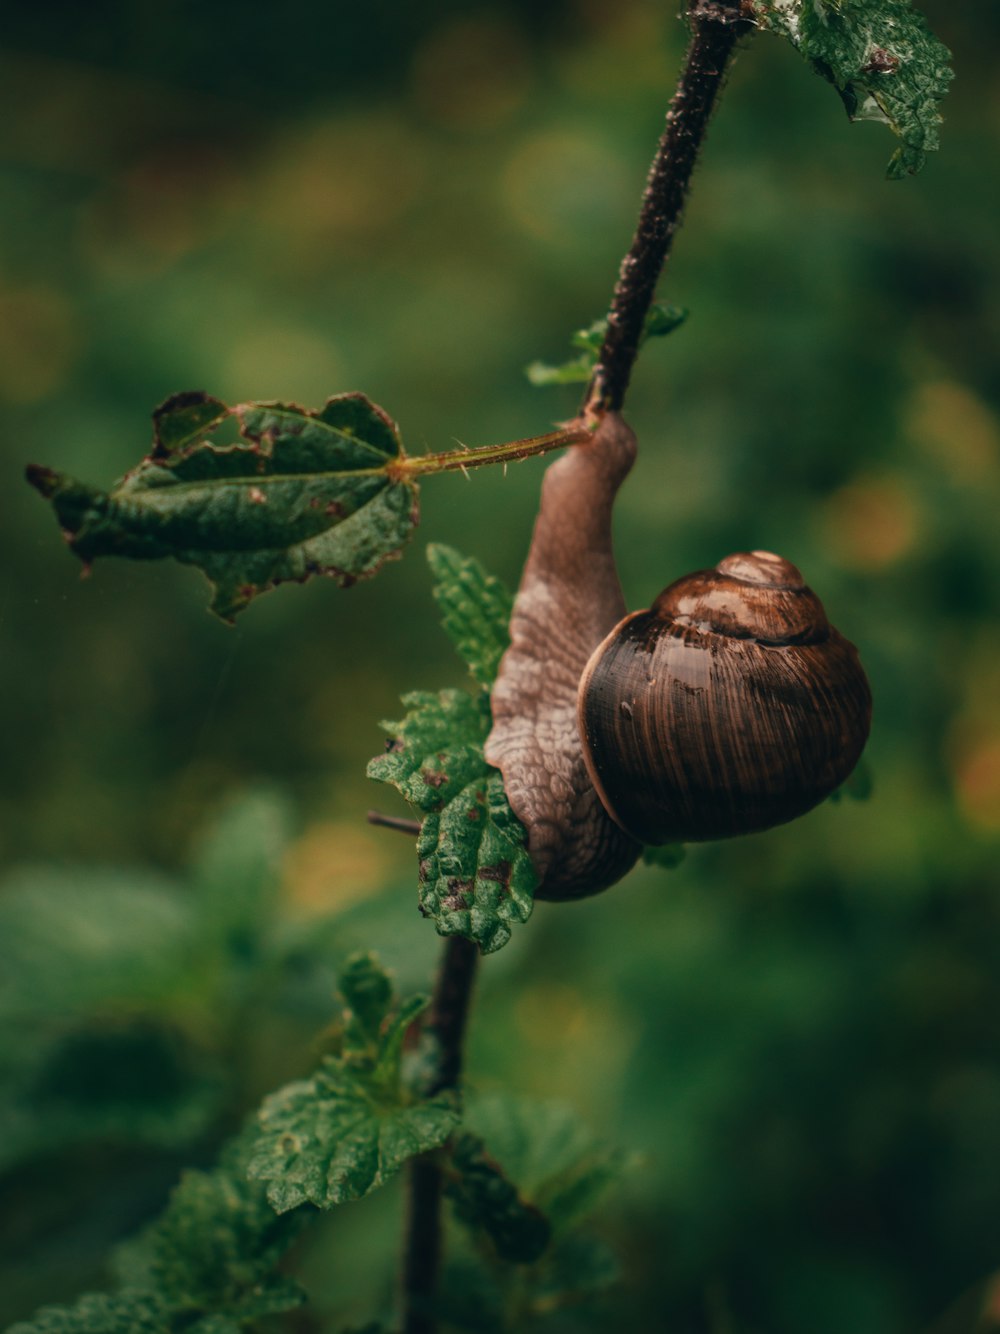 a snail crawling on a branch in a forest